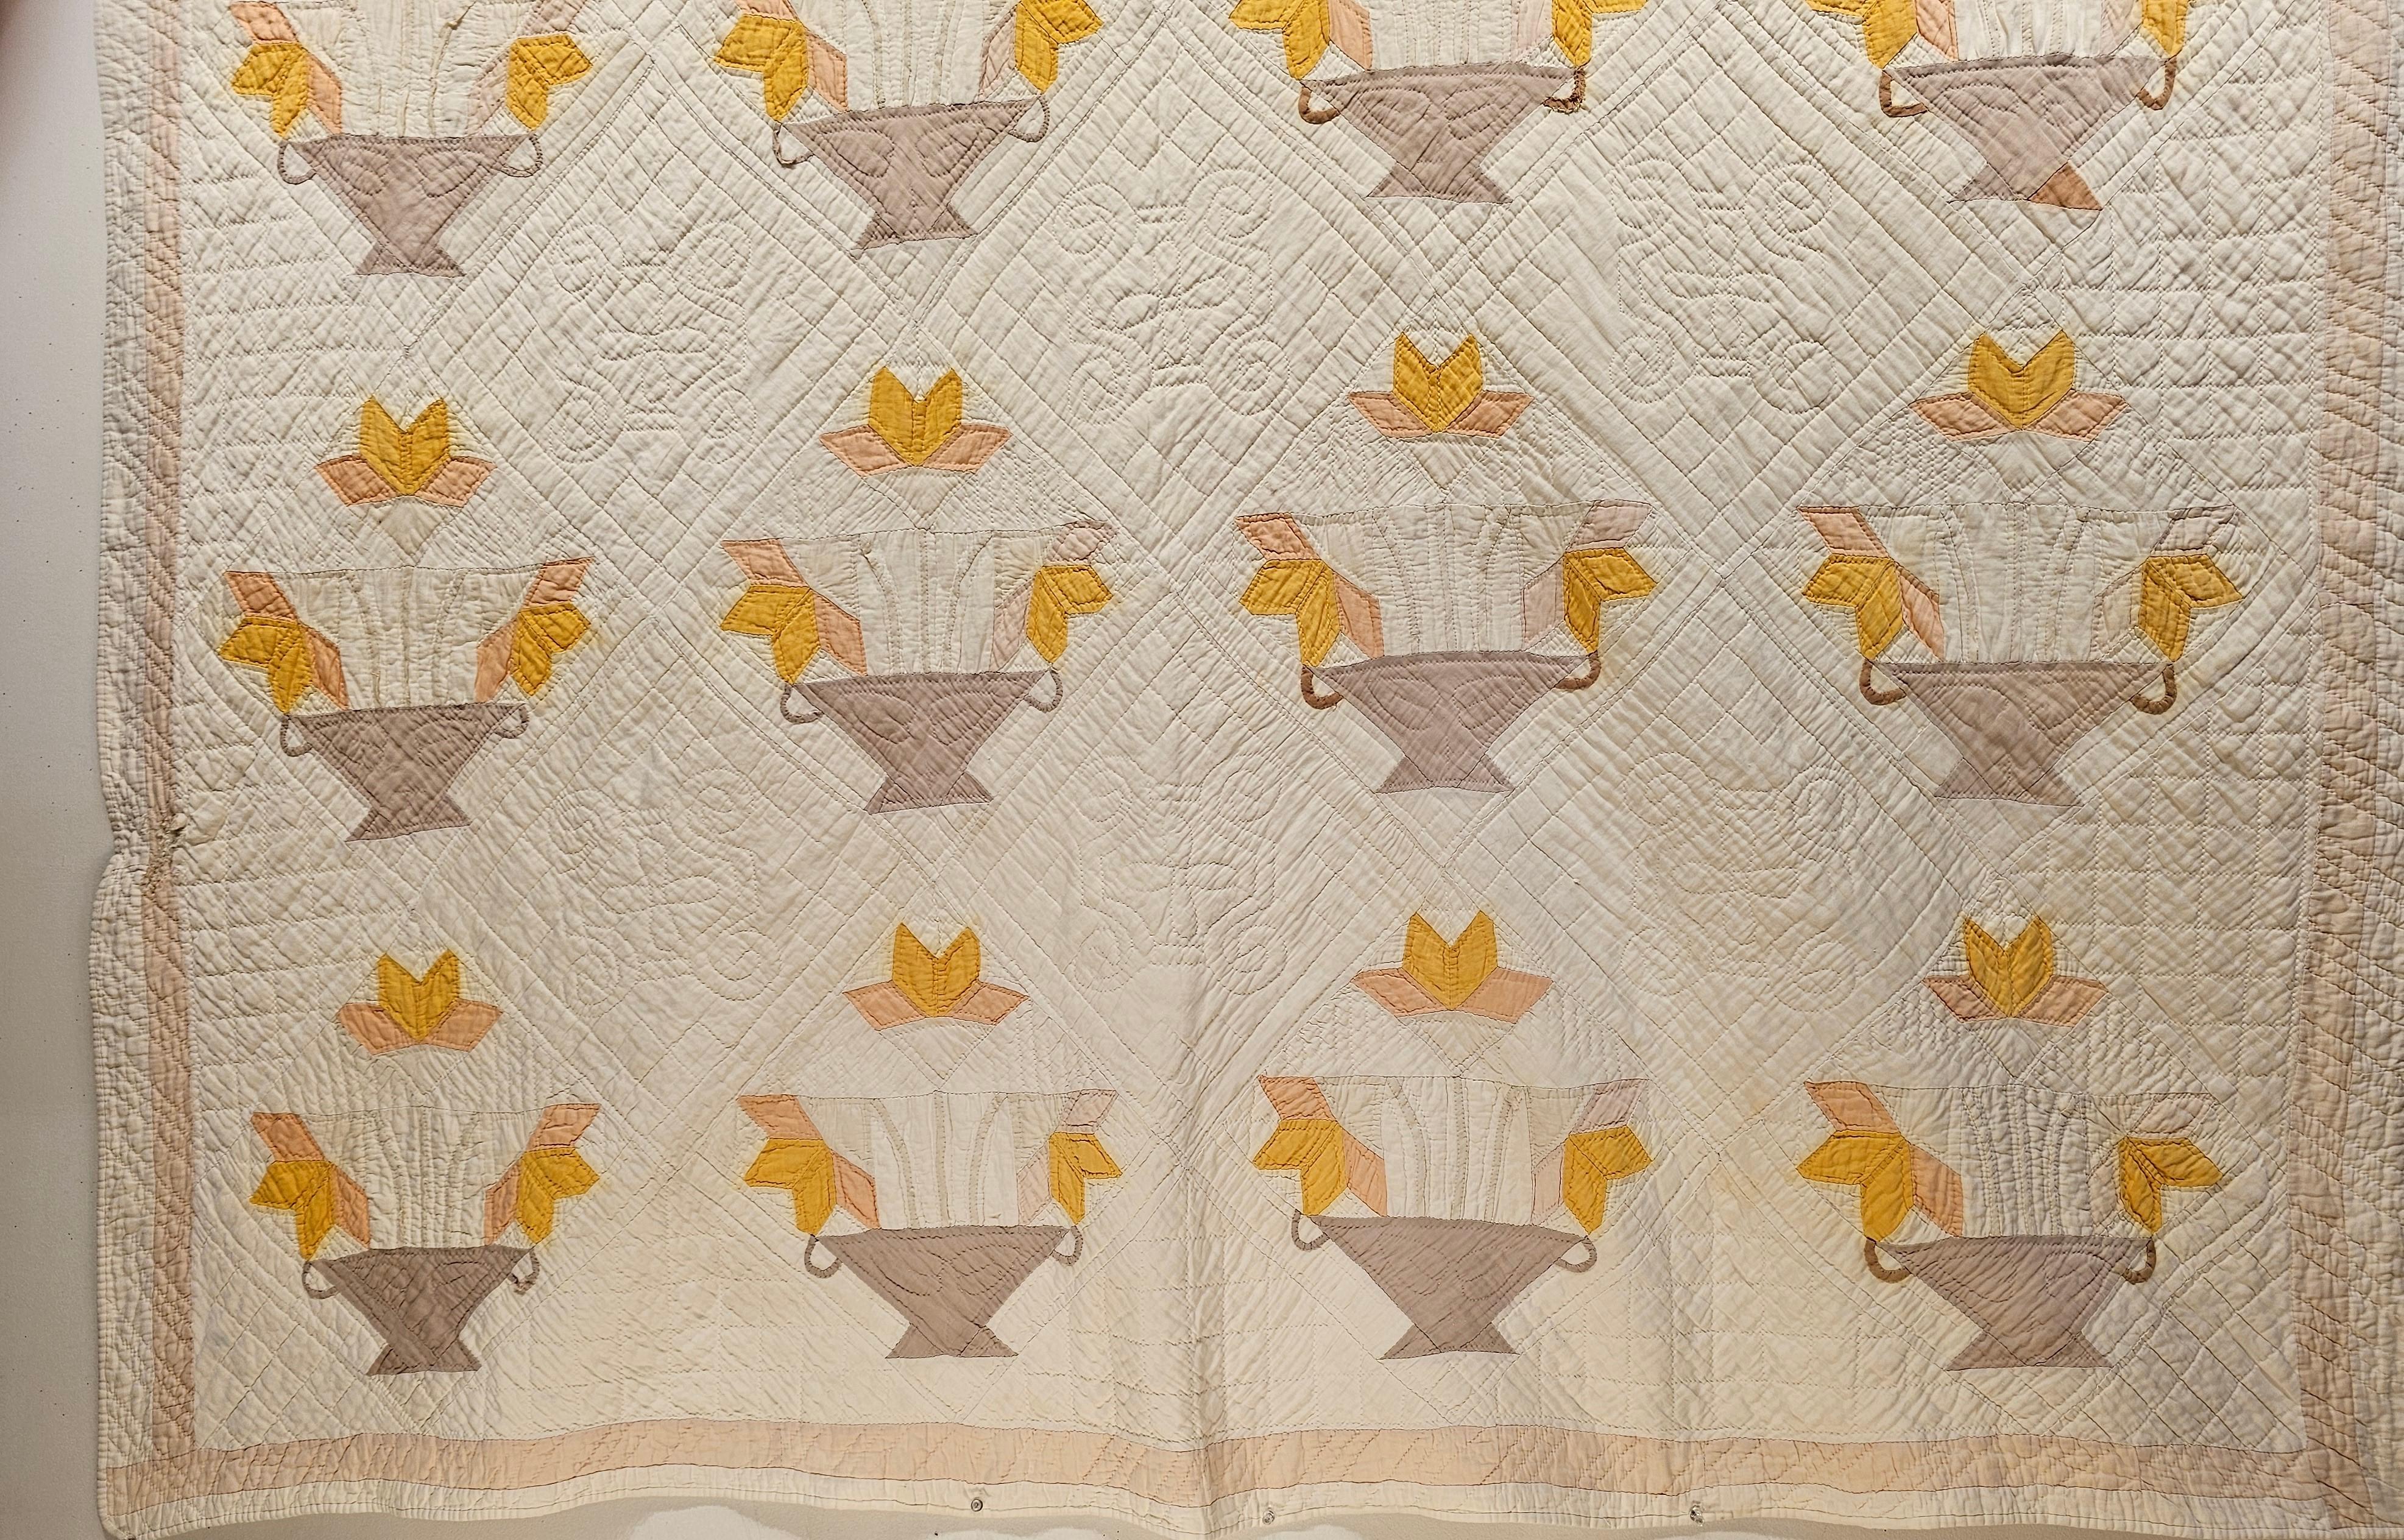 Vintage Hand Stitched Applique Quilt in Basket Pattern in Ivory, Brown, Yellow In Good Condition For Sale In Barrington, IL